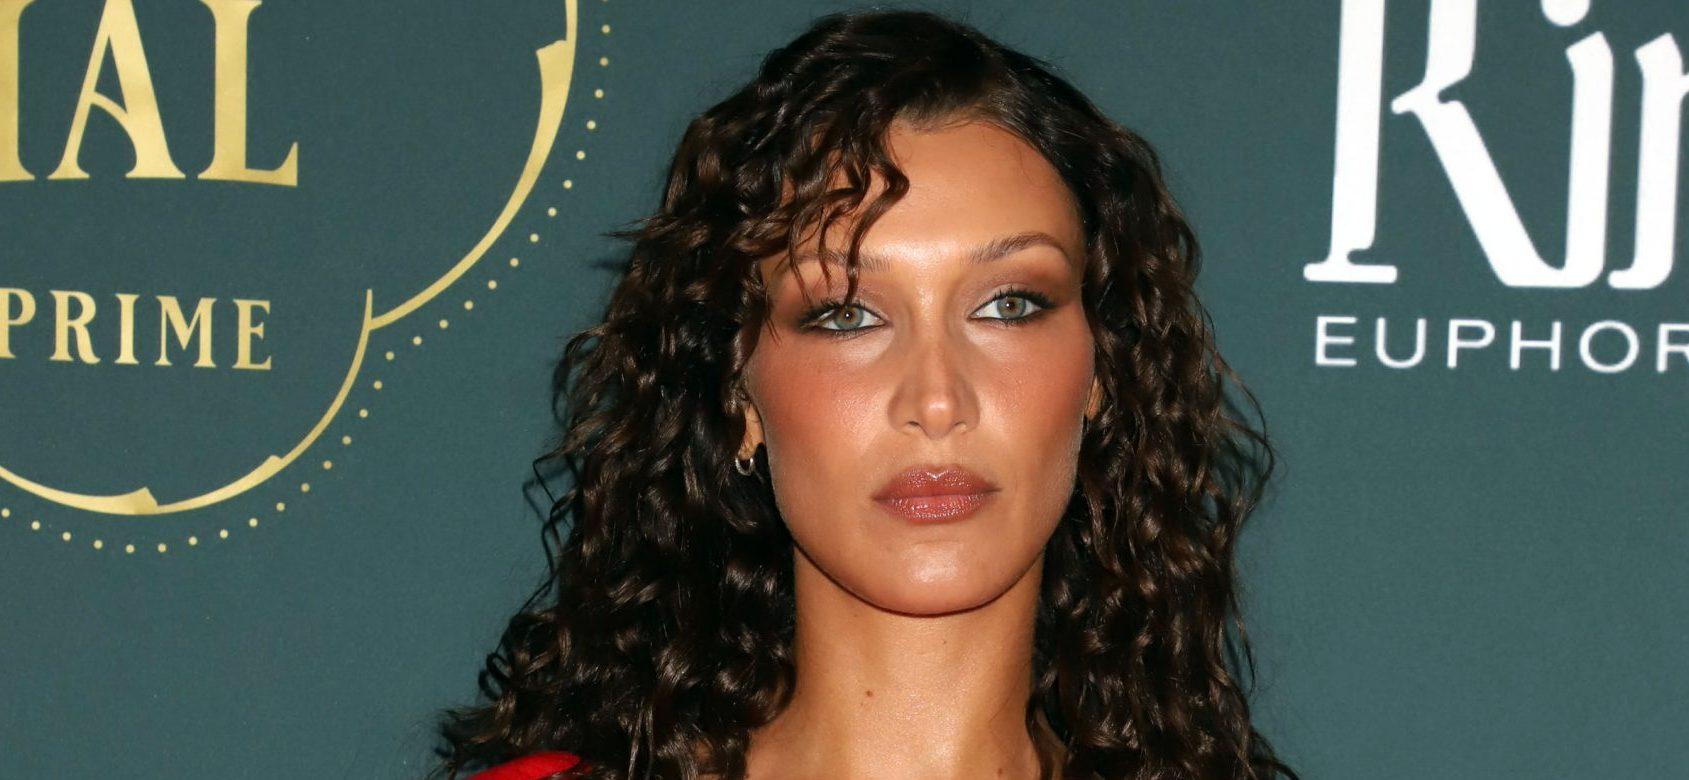 Bella Hadid Says She’s ‘Almost 10 Months’ Sober In Inspiring New Post Amid Lyme Disease Battle